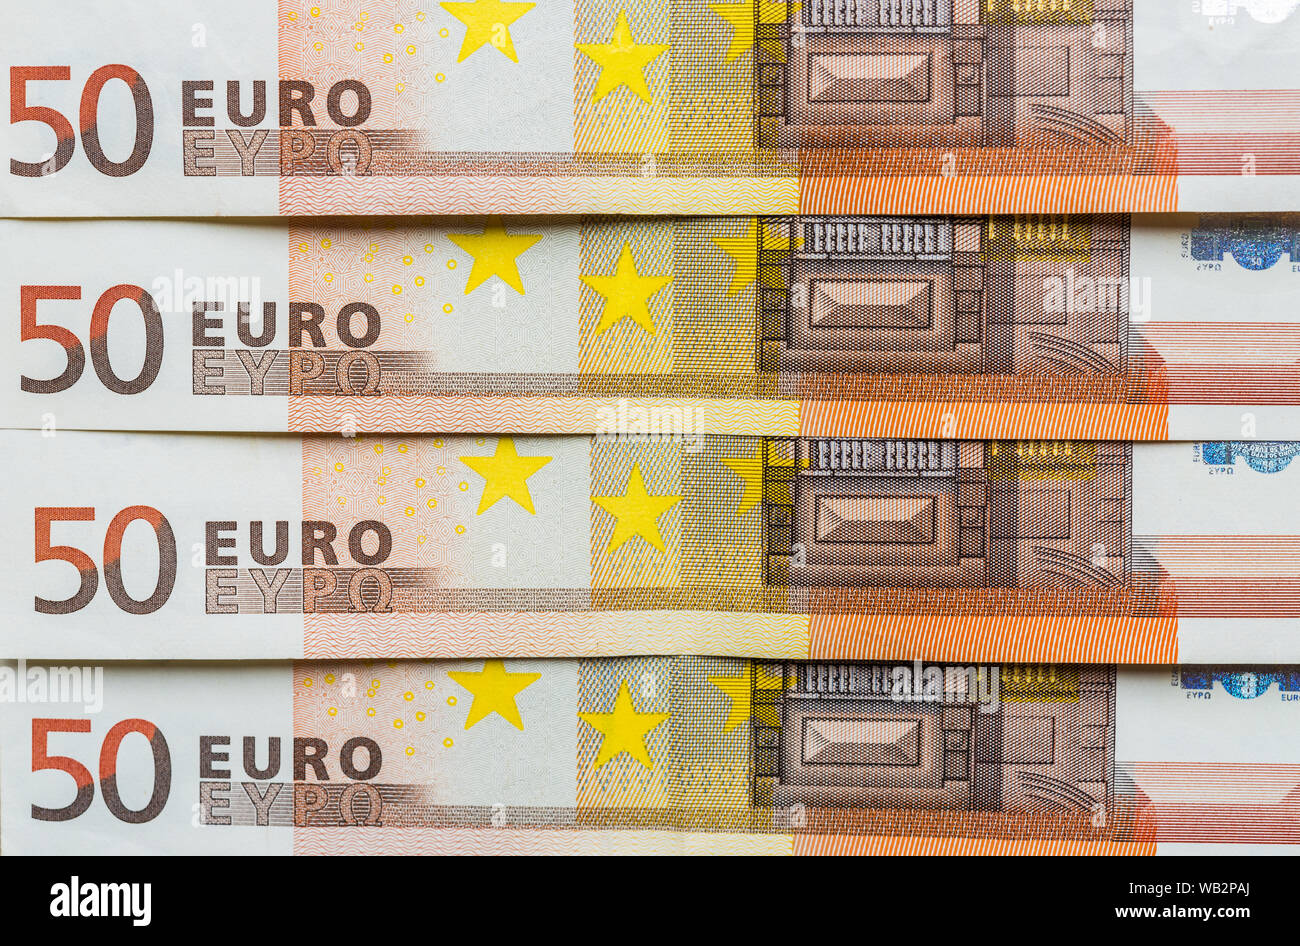 Euro currency of 50 euros. Concept of finance, business, European Union. Stock Photo